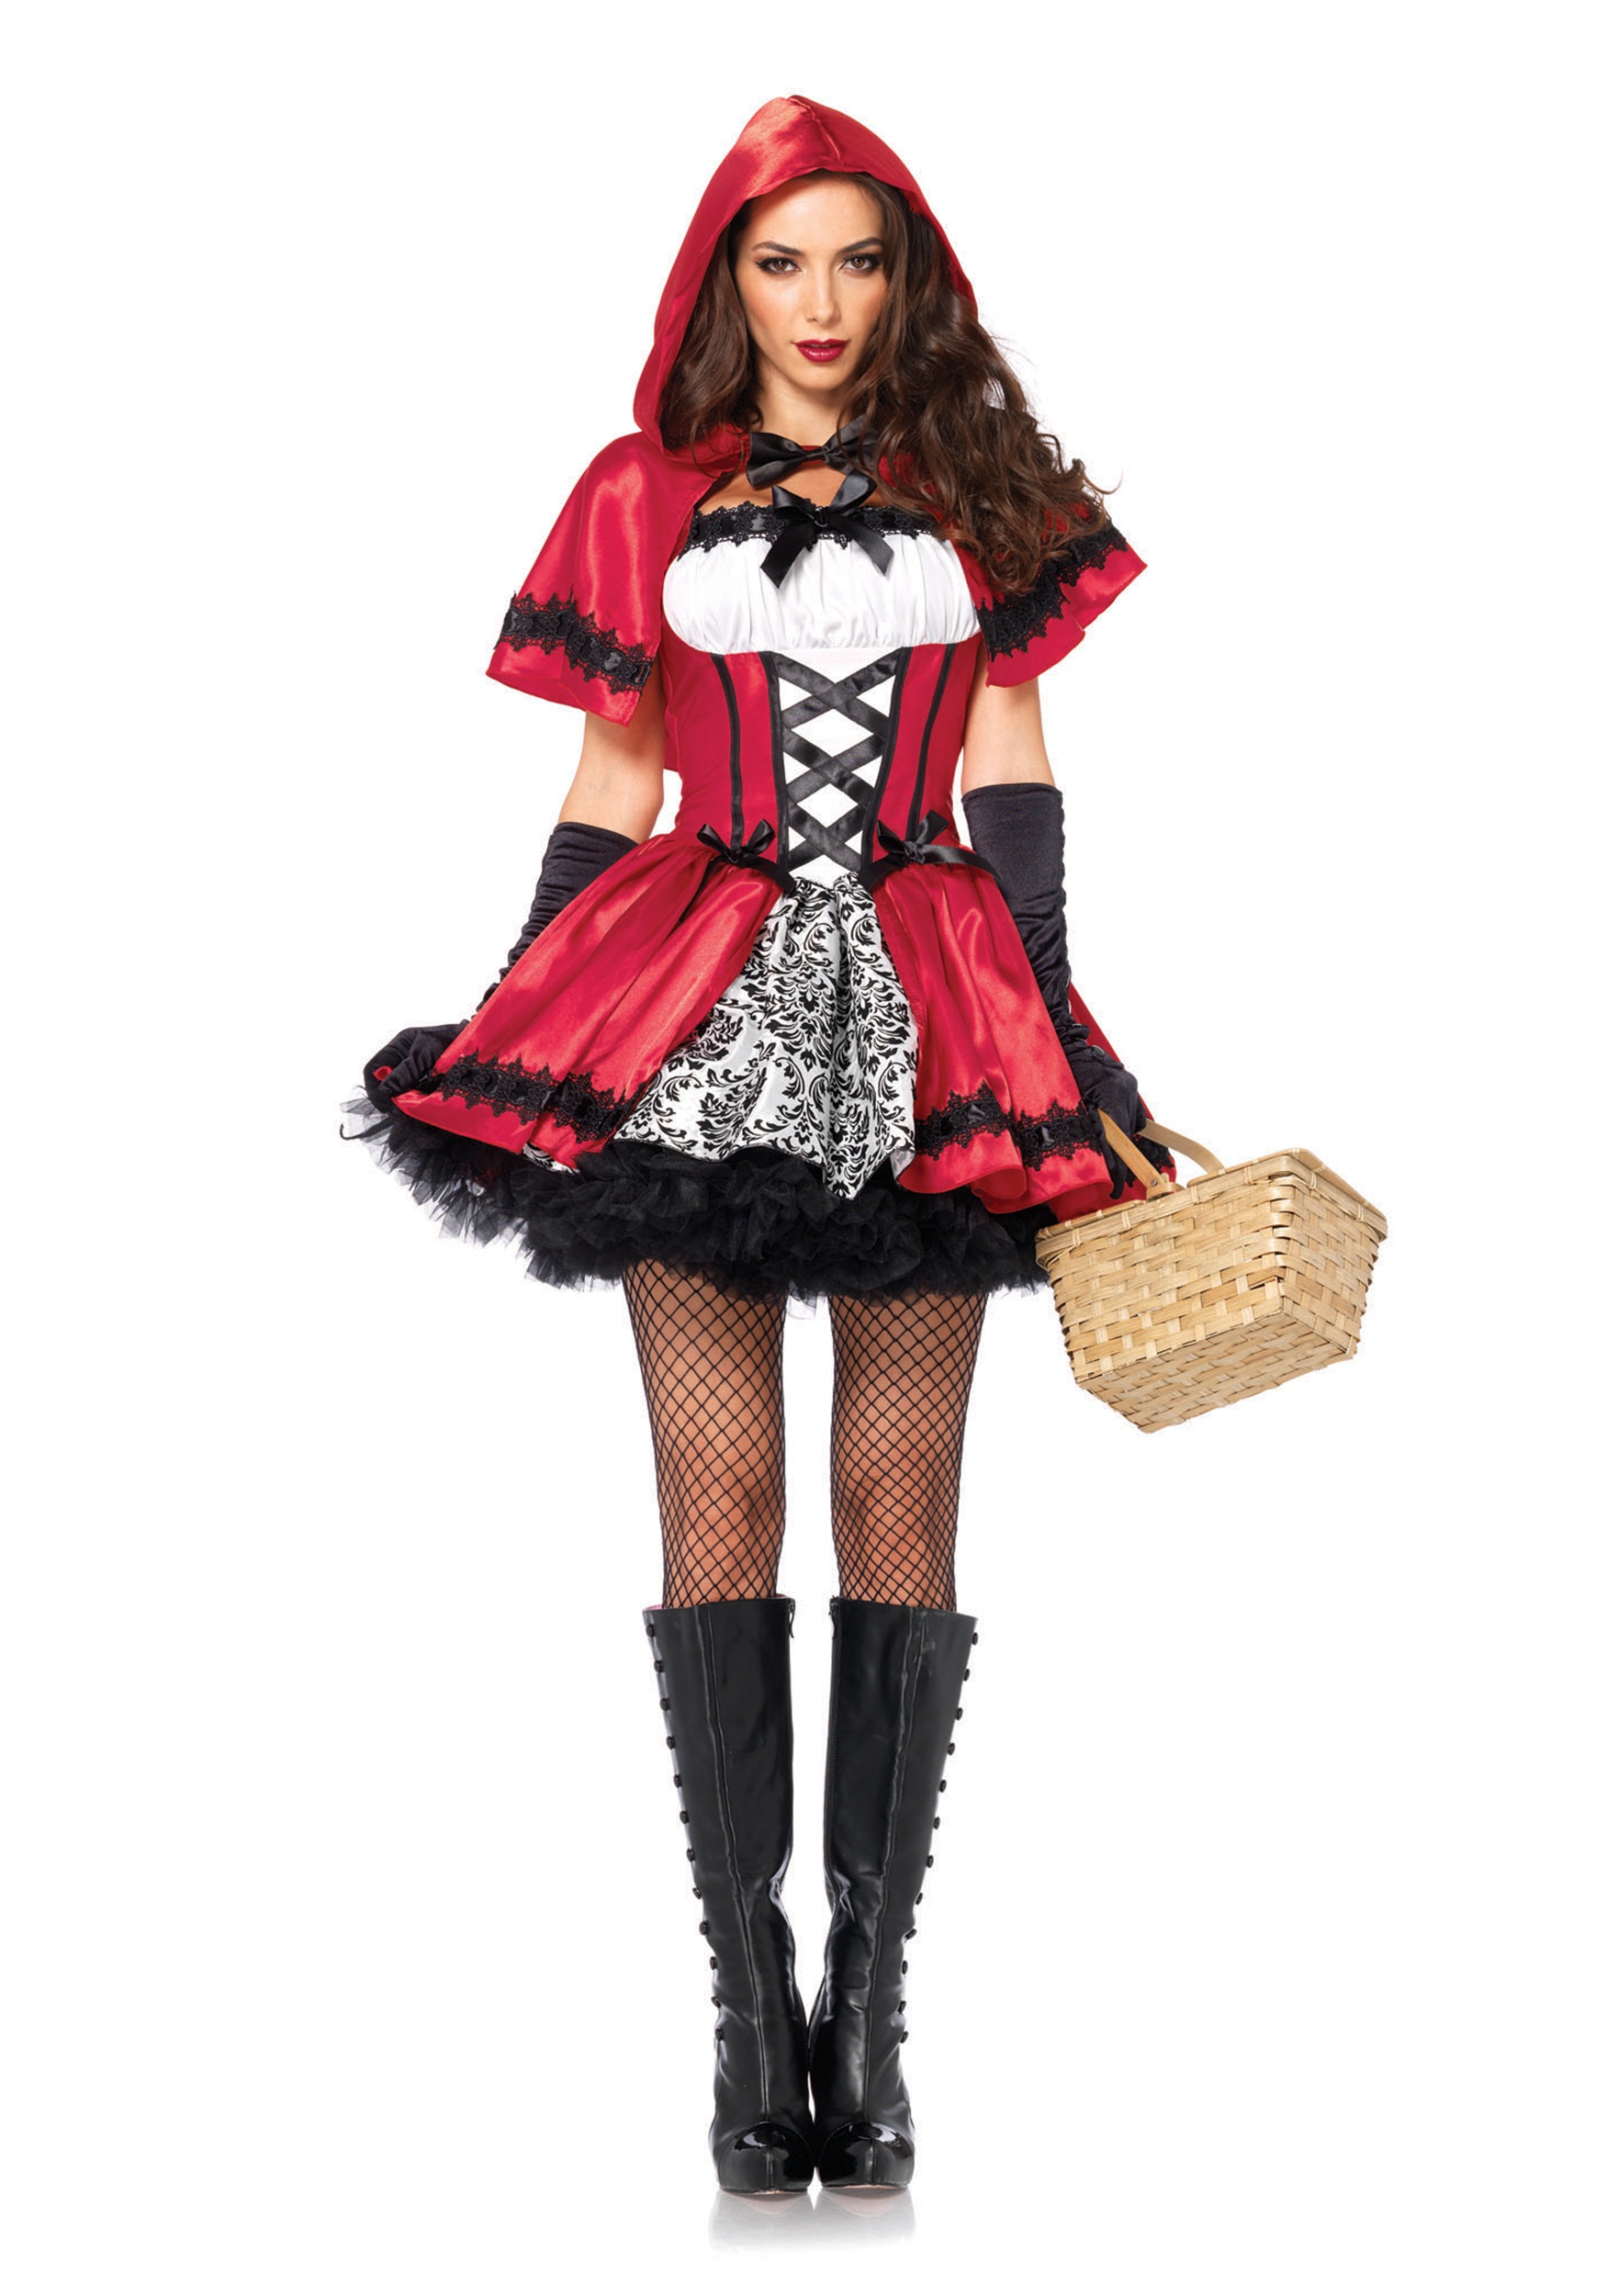 Red Riding Hood Costume Adult 106